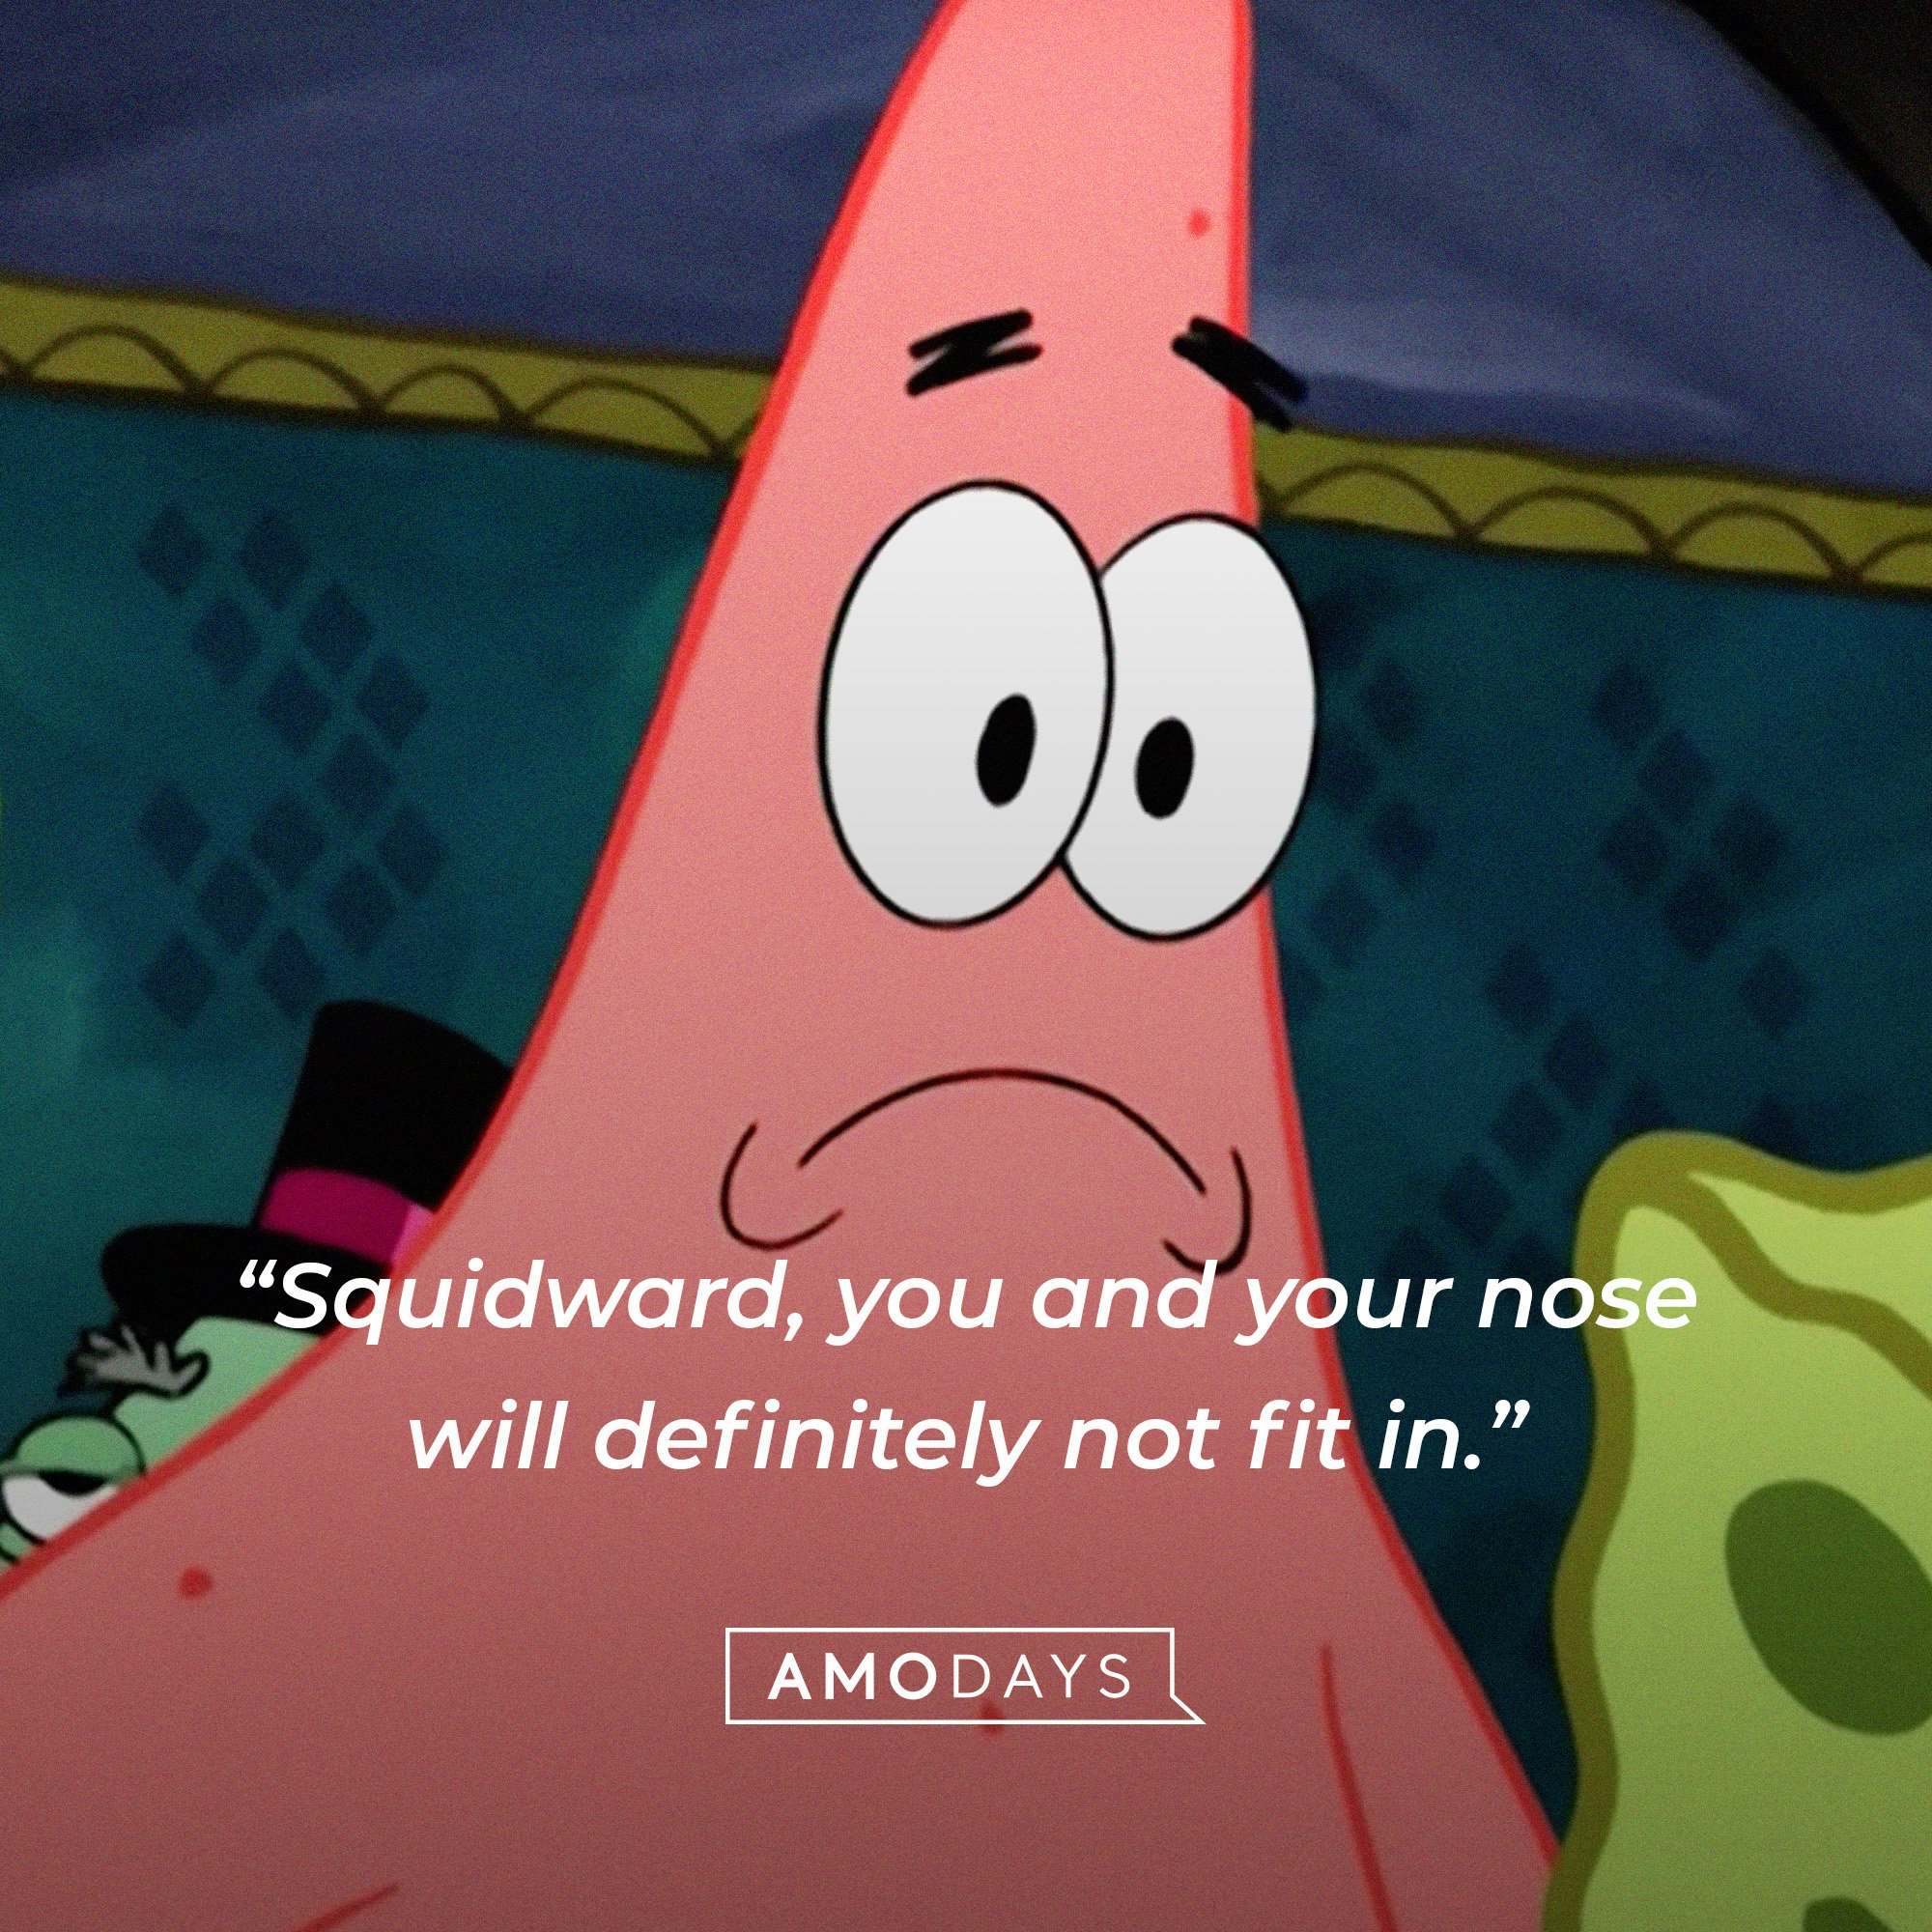 Patrick Star’s quote: “Squidward, you and your nose will definitely not fit in.” | Image: AmoDays